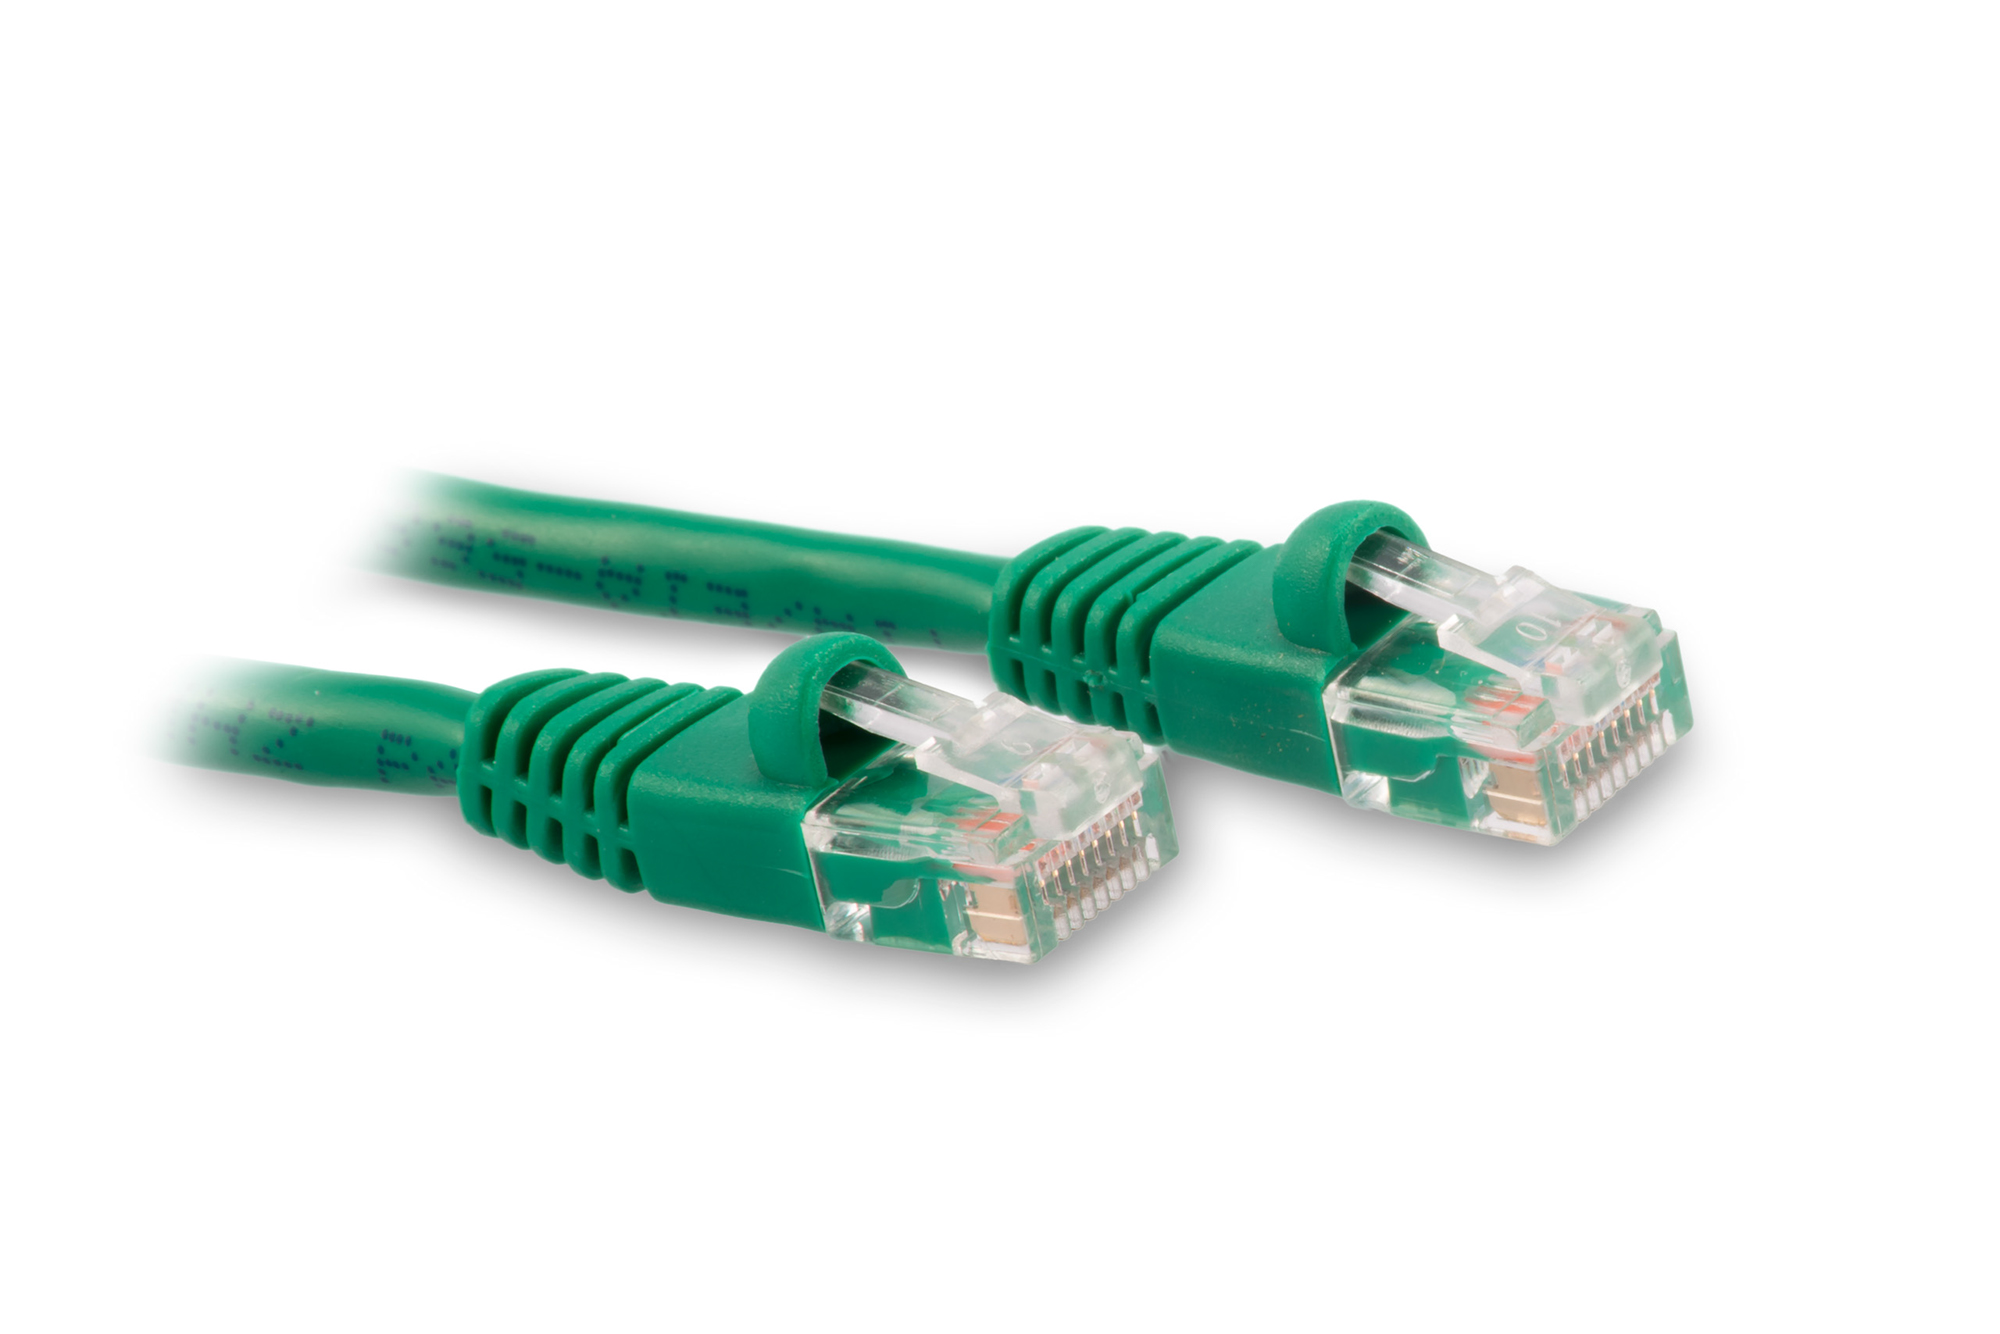 1ft Cat6 Ethernet Patch Cable - Green Color - Snagless Boot